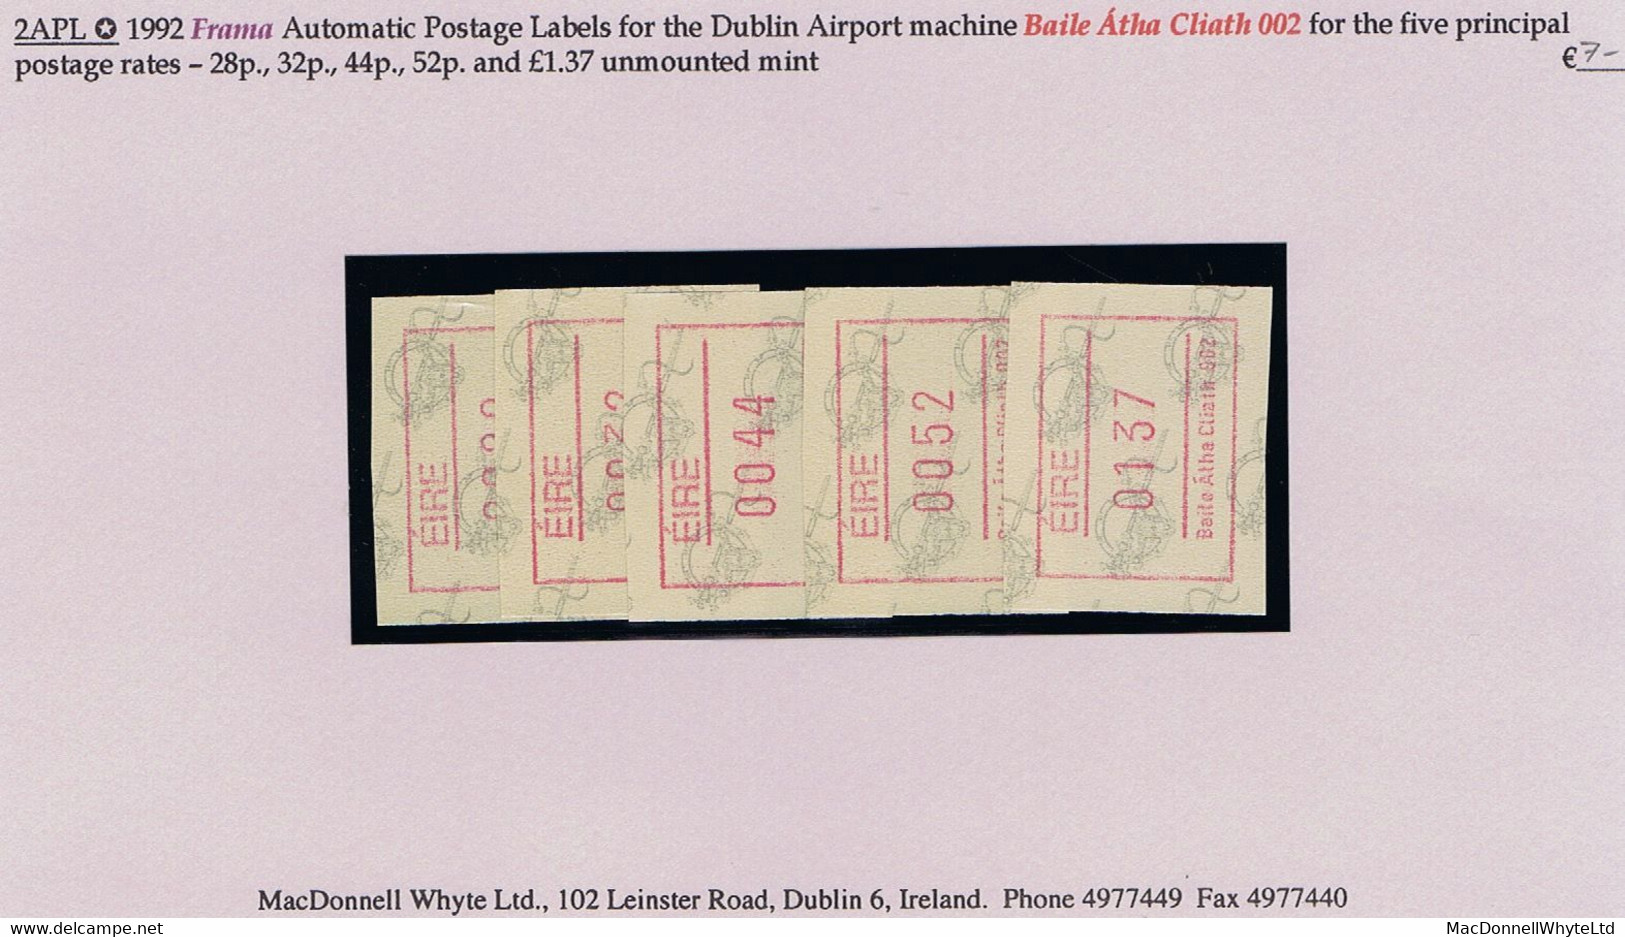 Ireland 1992 Frama Automatic Postage Labels For Dublin 002 Machine For Five Rates 28p, 32p, 44p, 52p, £1.37 Mint - Franking Labels